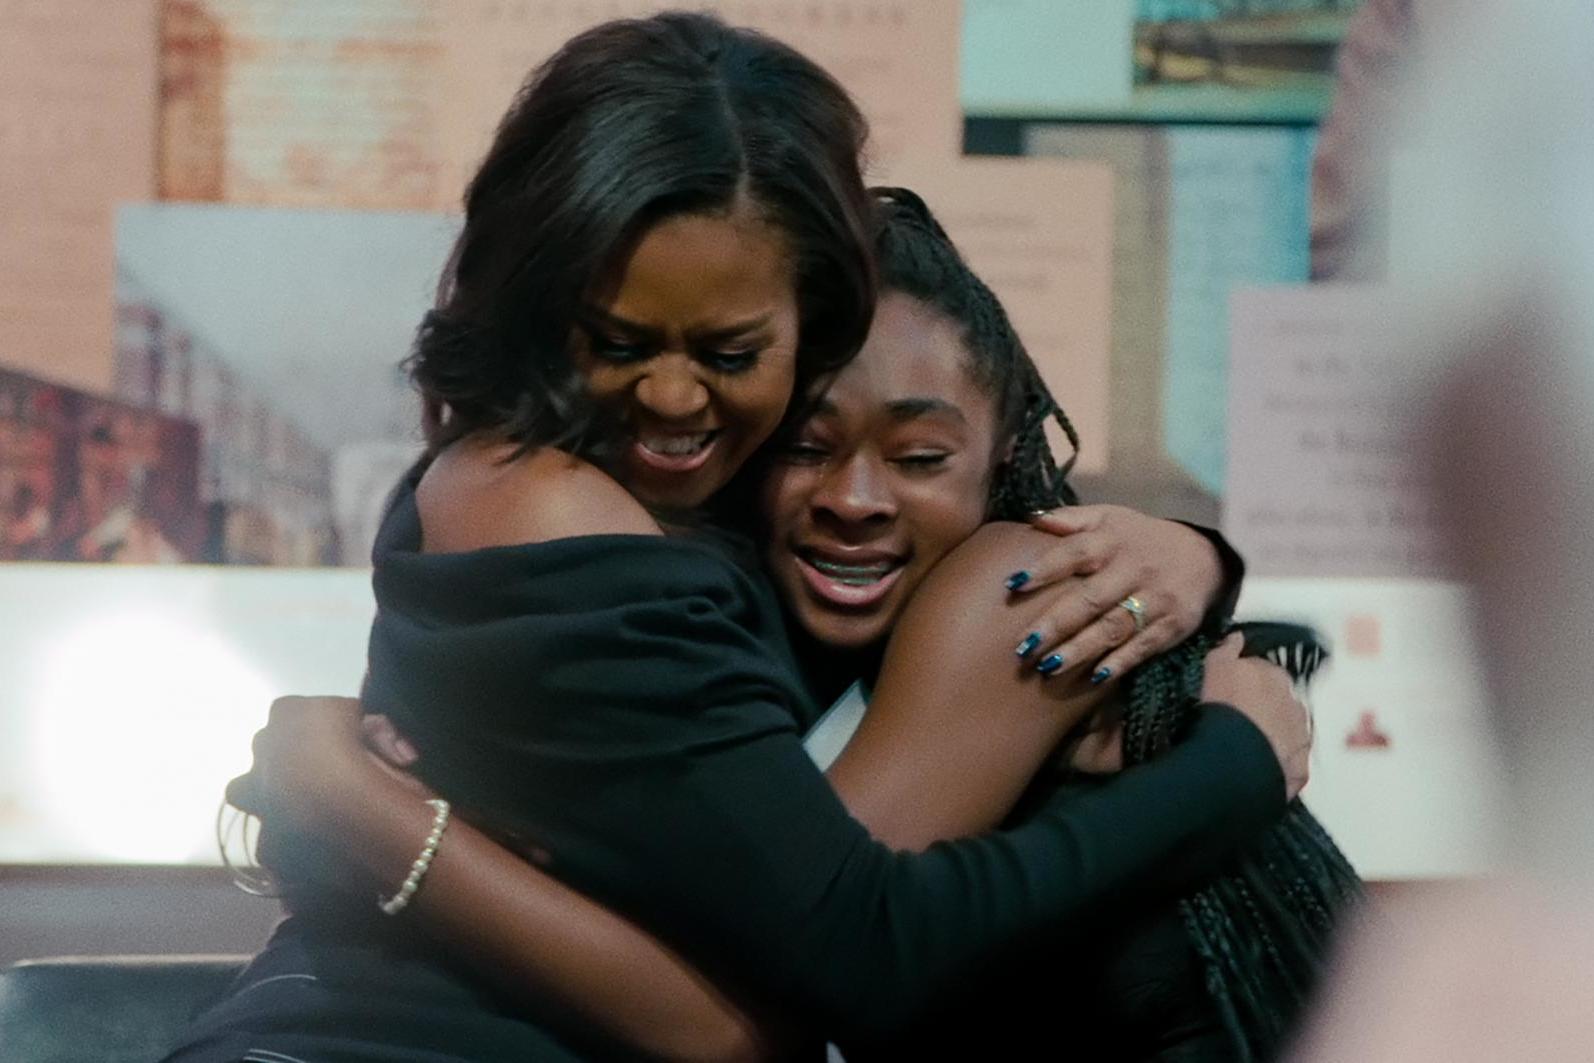 Becoming: Documentary based on Michelle Obama book tour coming to Netflix